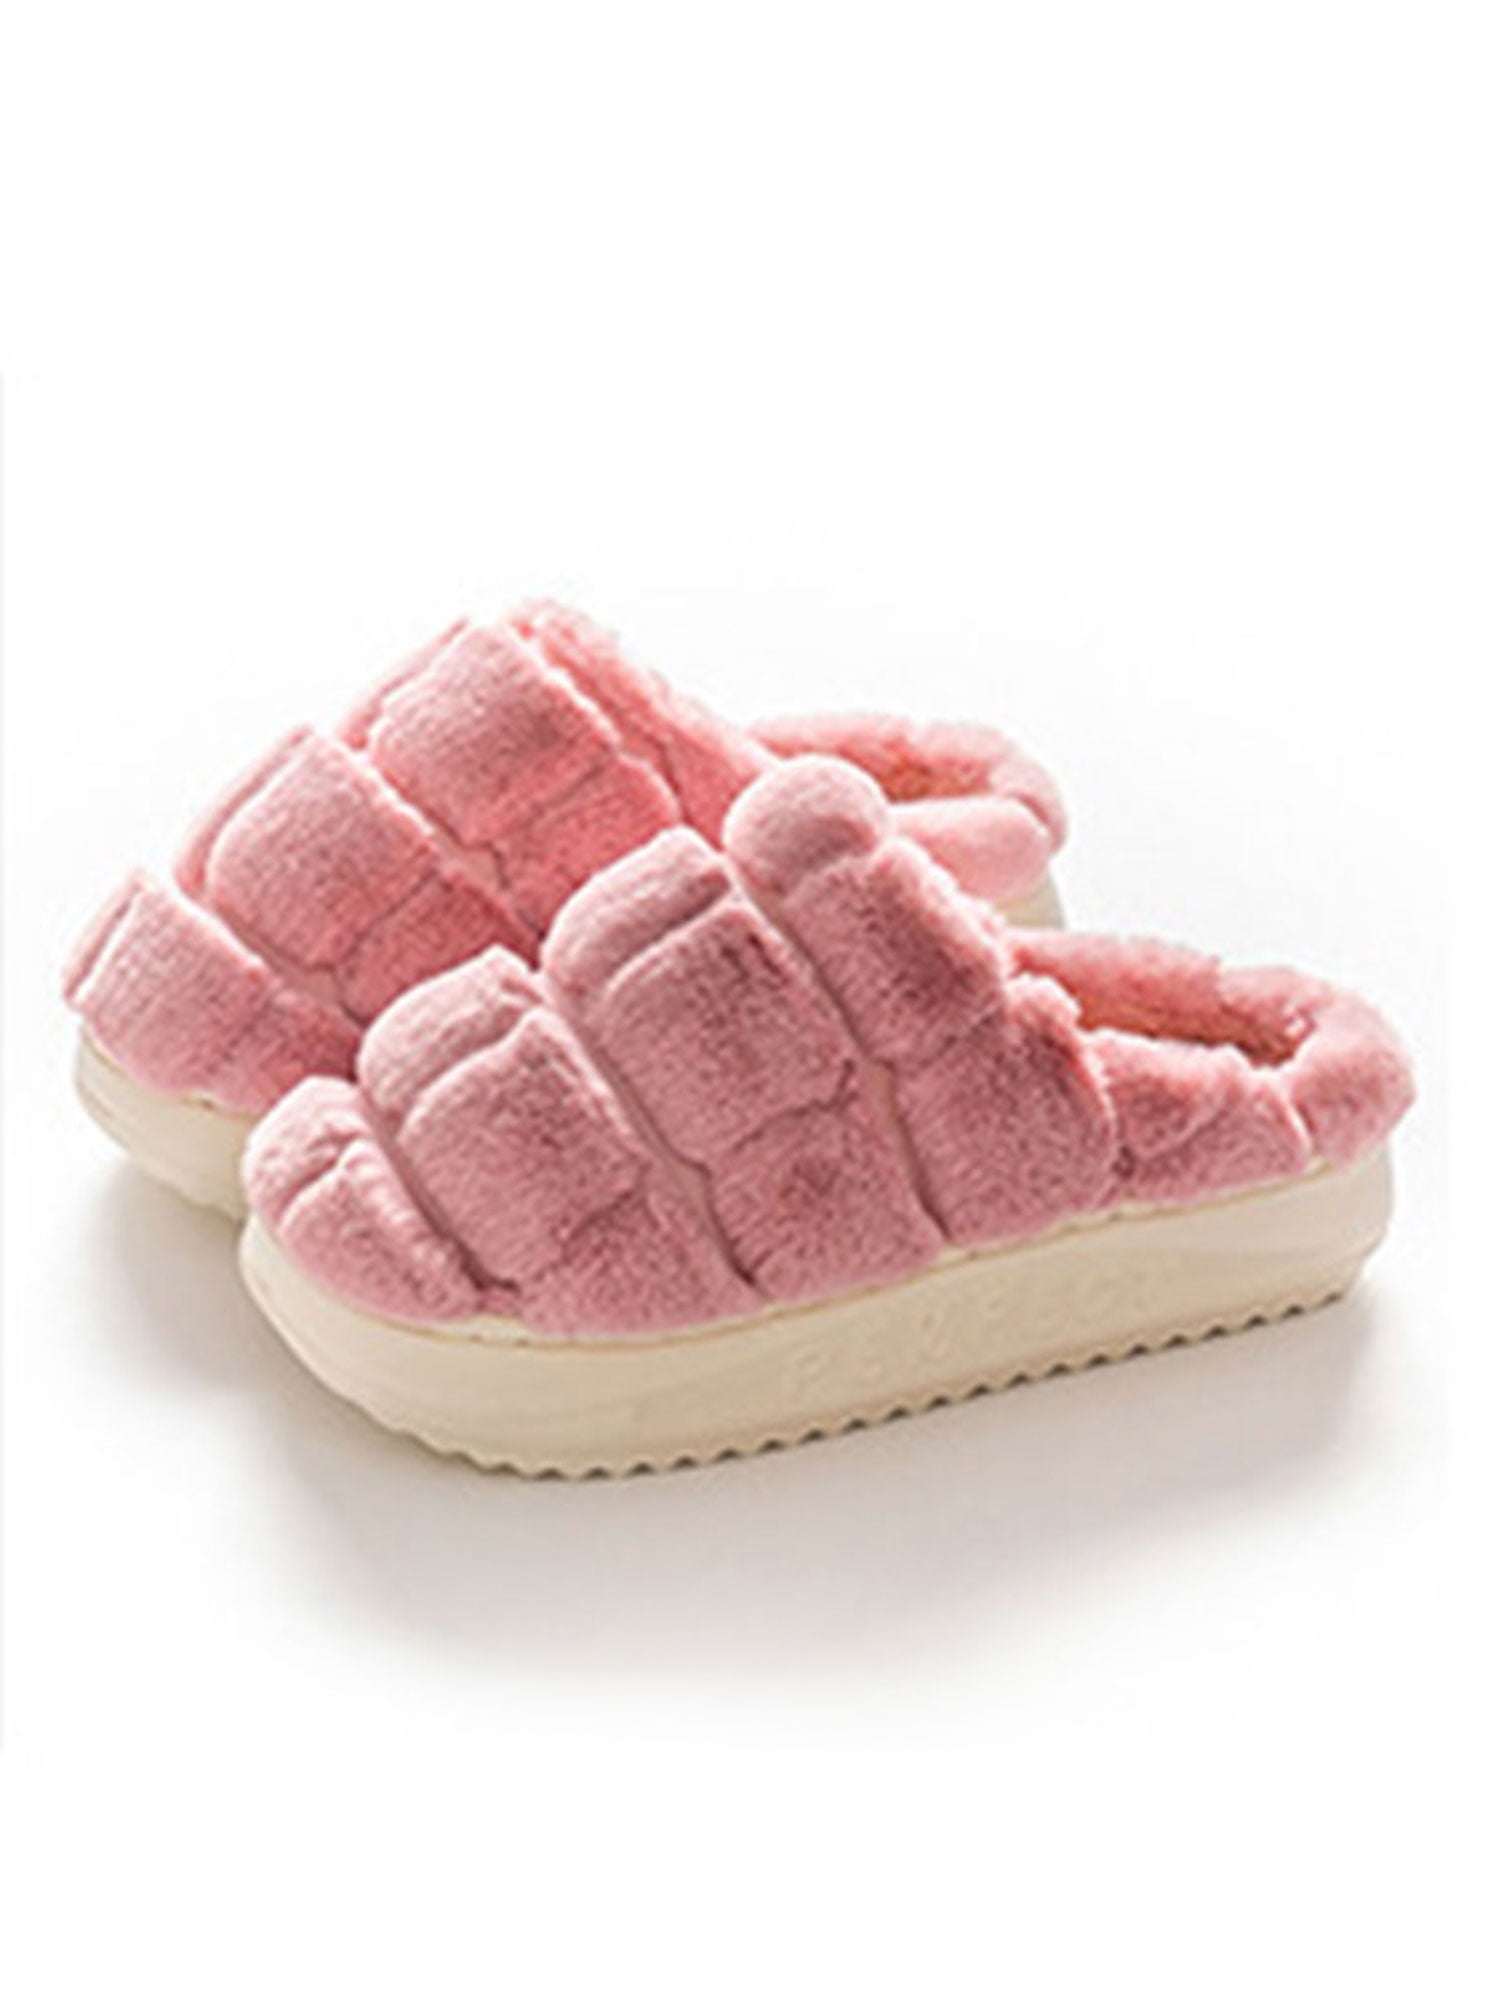 Womens Soft Warm Comfy Cosy Home Kitchen Flat Slippers Mule Toe Size 3-8 